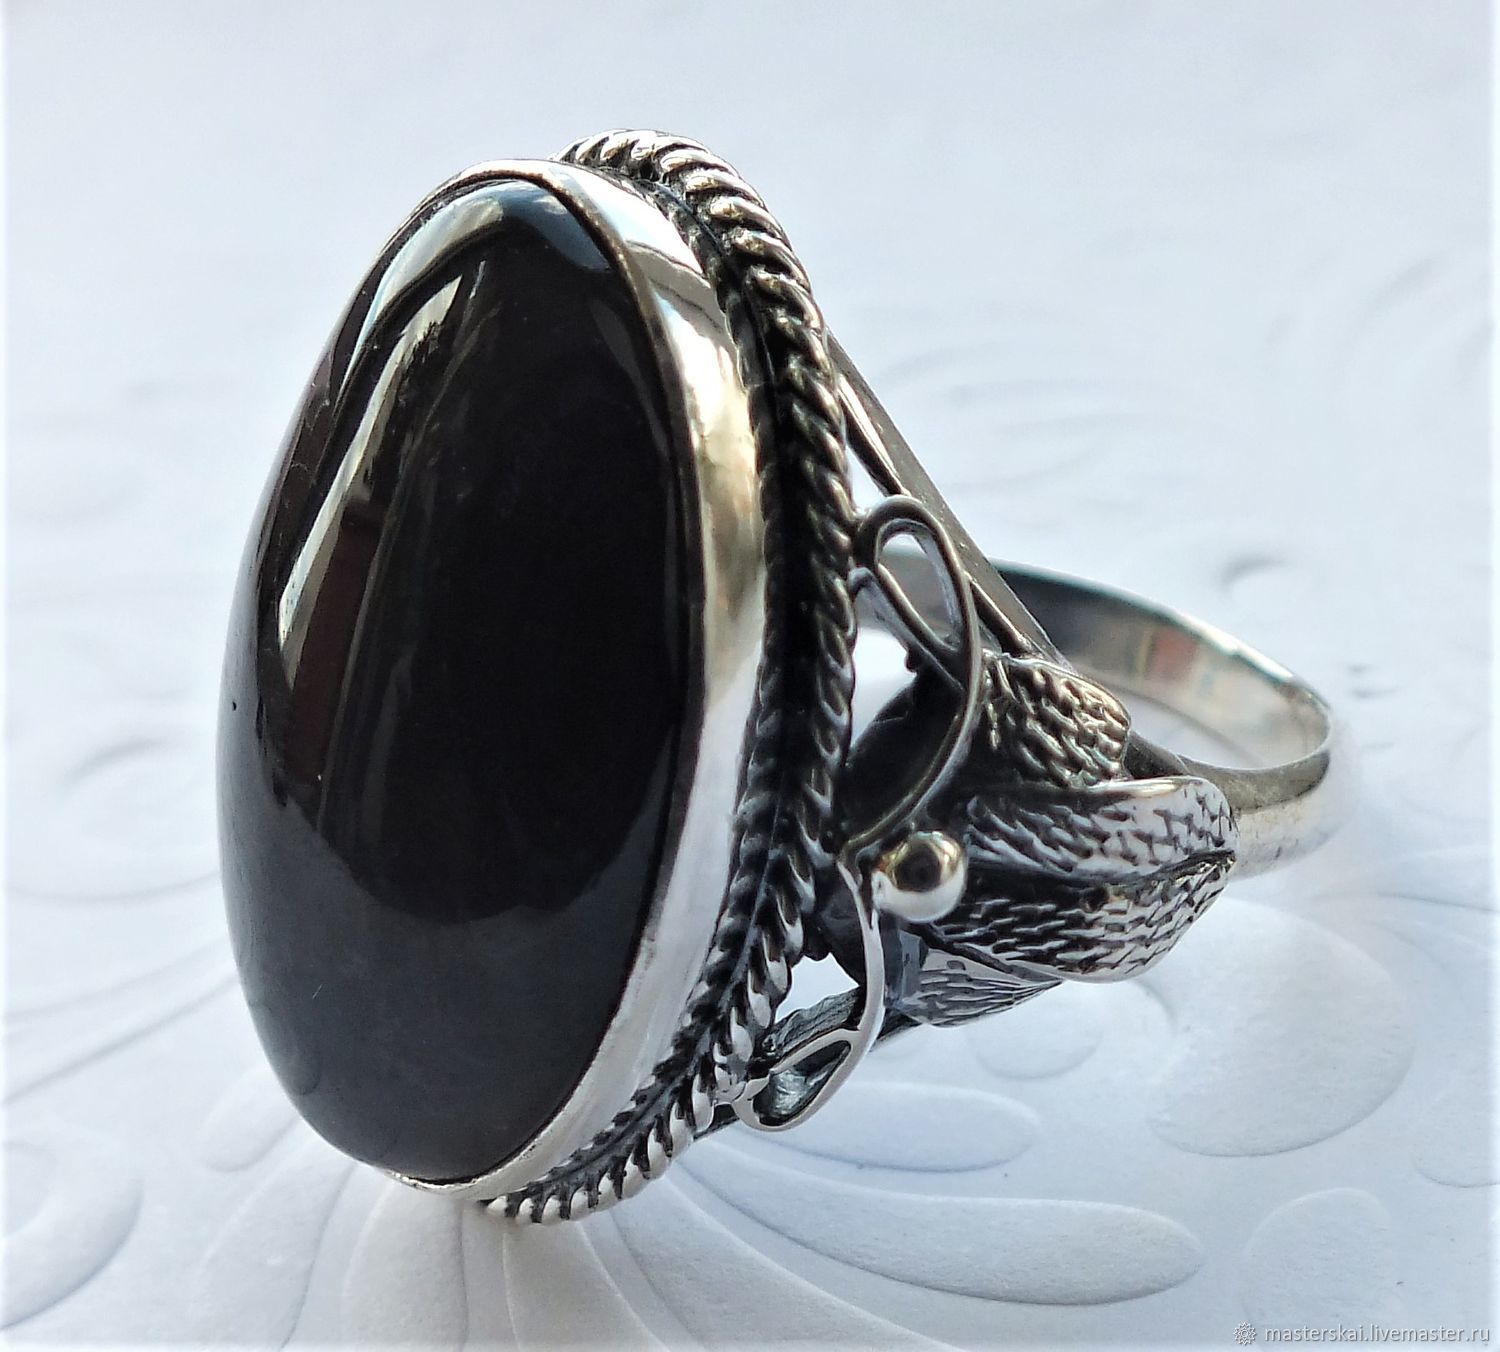 Melloni ring-black tourmaline, 925 silver, Rings, Moscow,  Фото №1